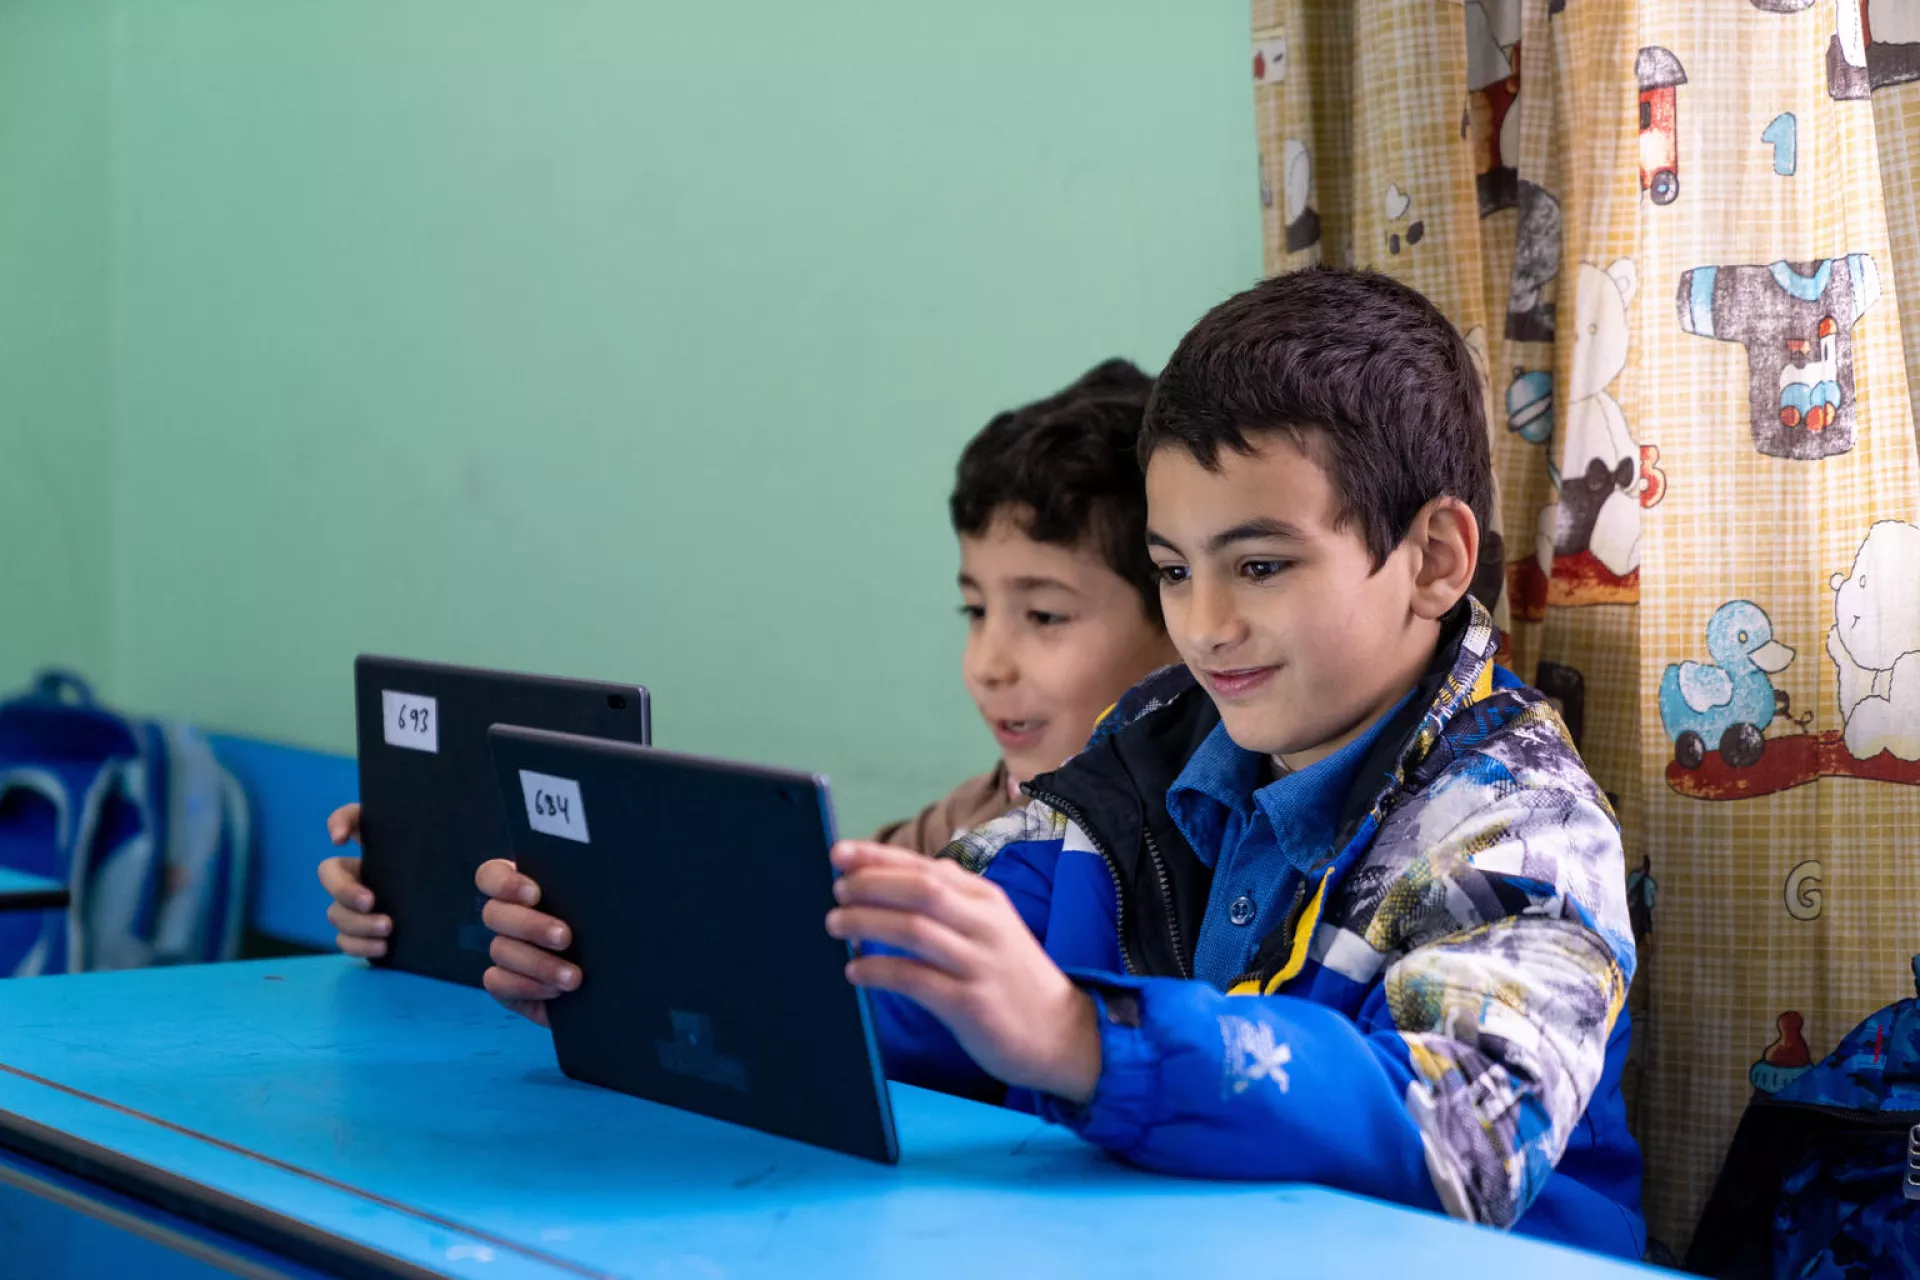 Two young boys at school learning from an IPAD 